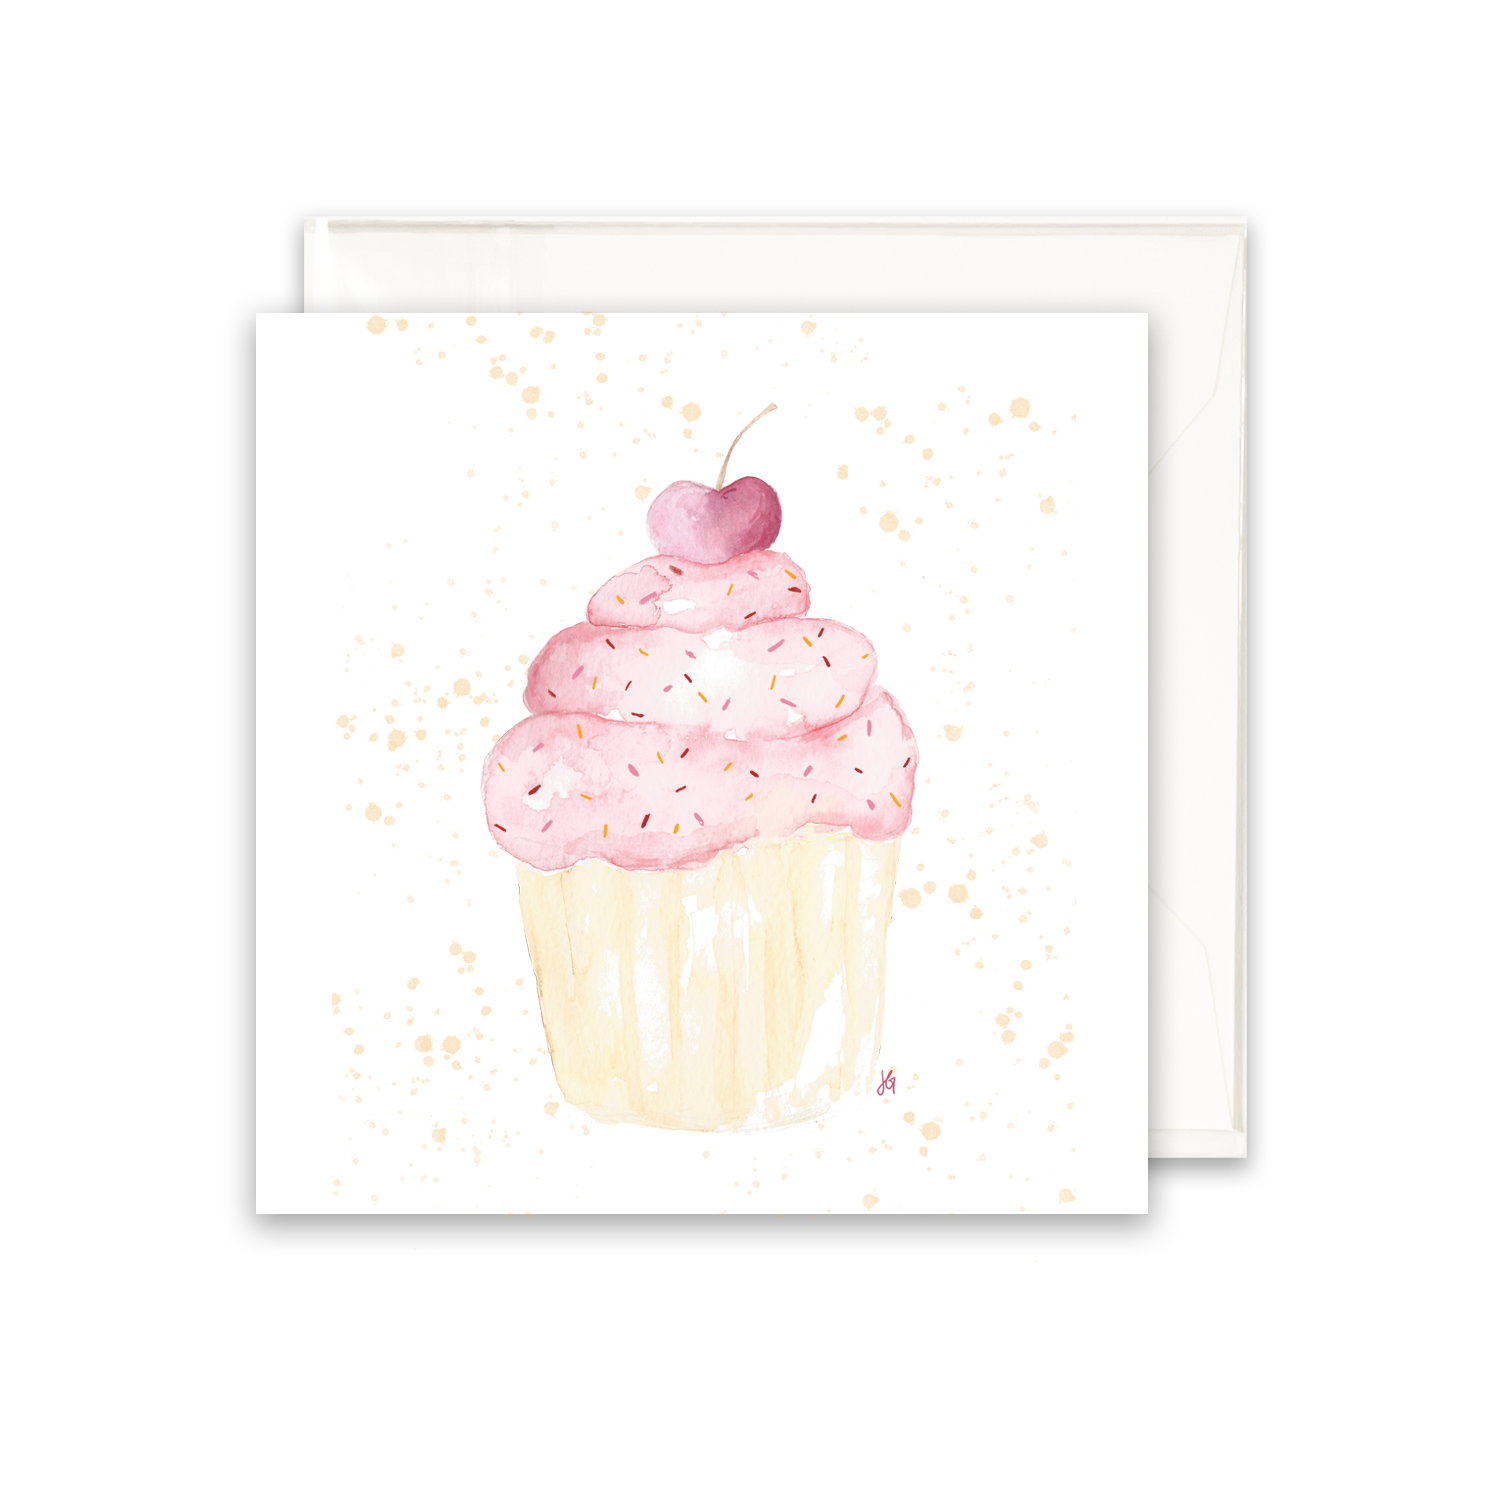 pink cupcake with a cherry on top, varying shades of pink and orange sprinkles, watercolor illustration greeting card, blank inside.  Enclosure card